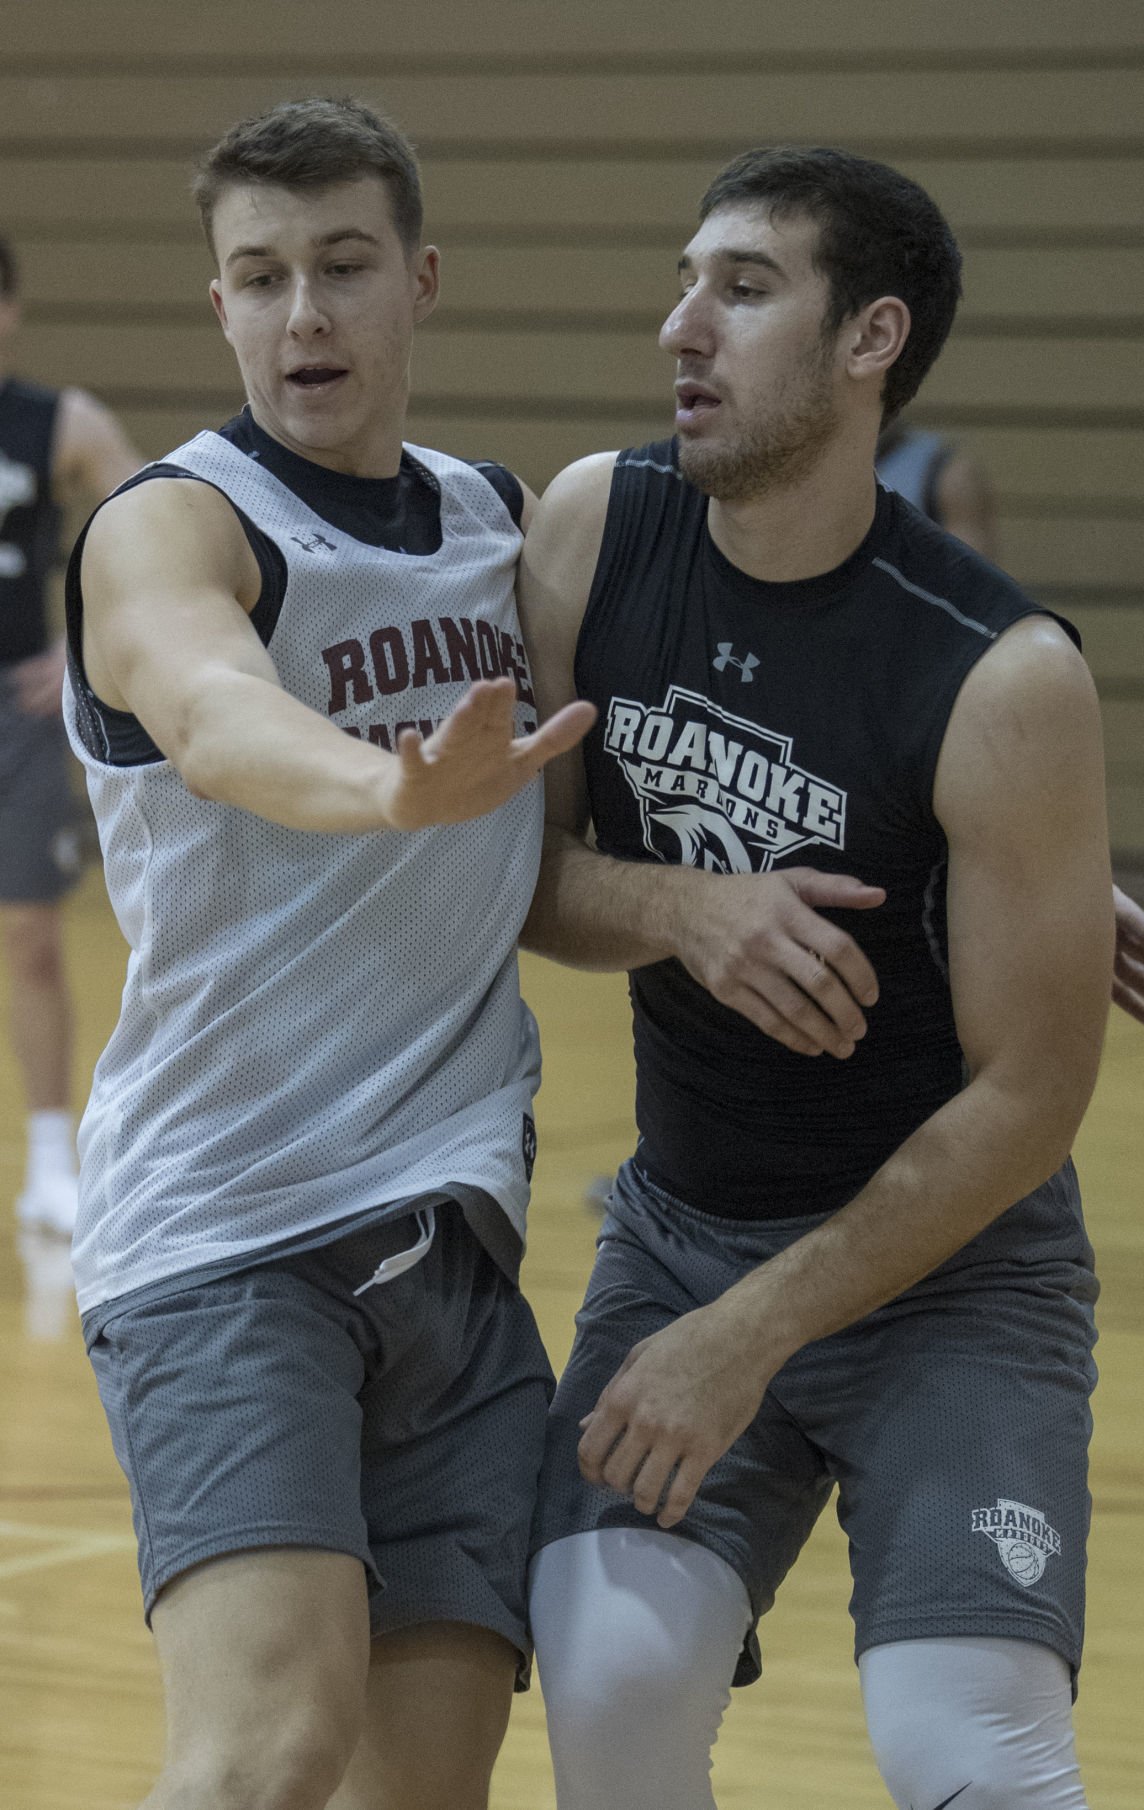 Roanoke College men's basketball team aims for ODAC title | College